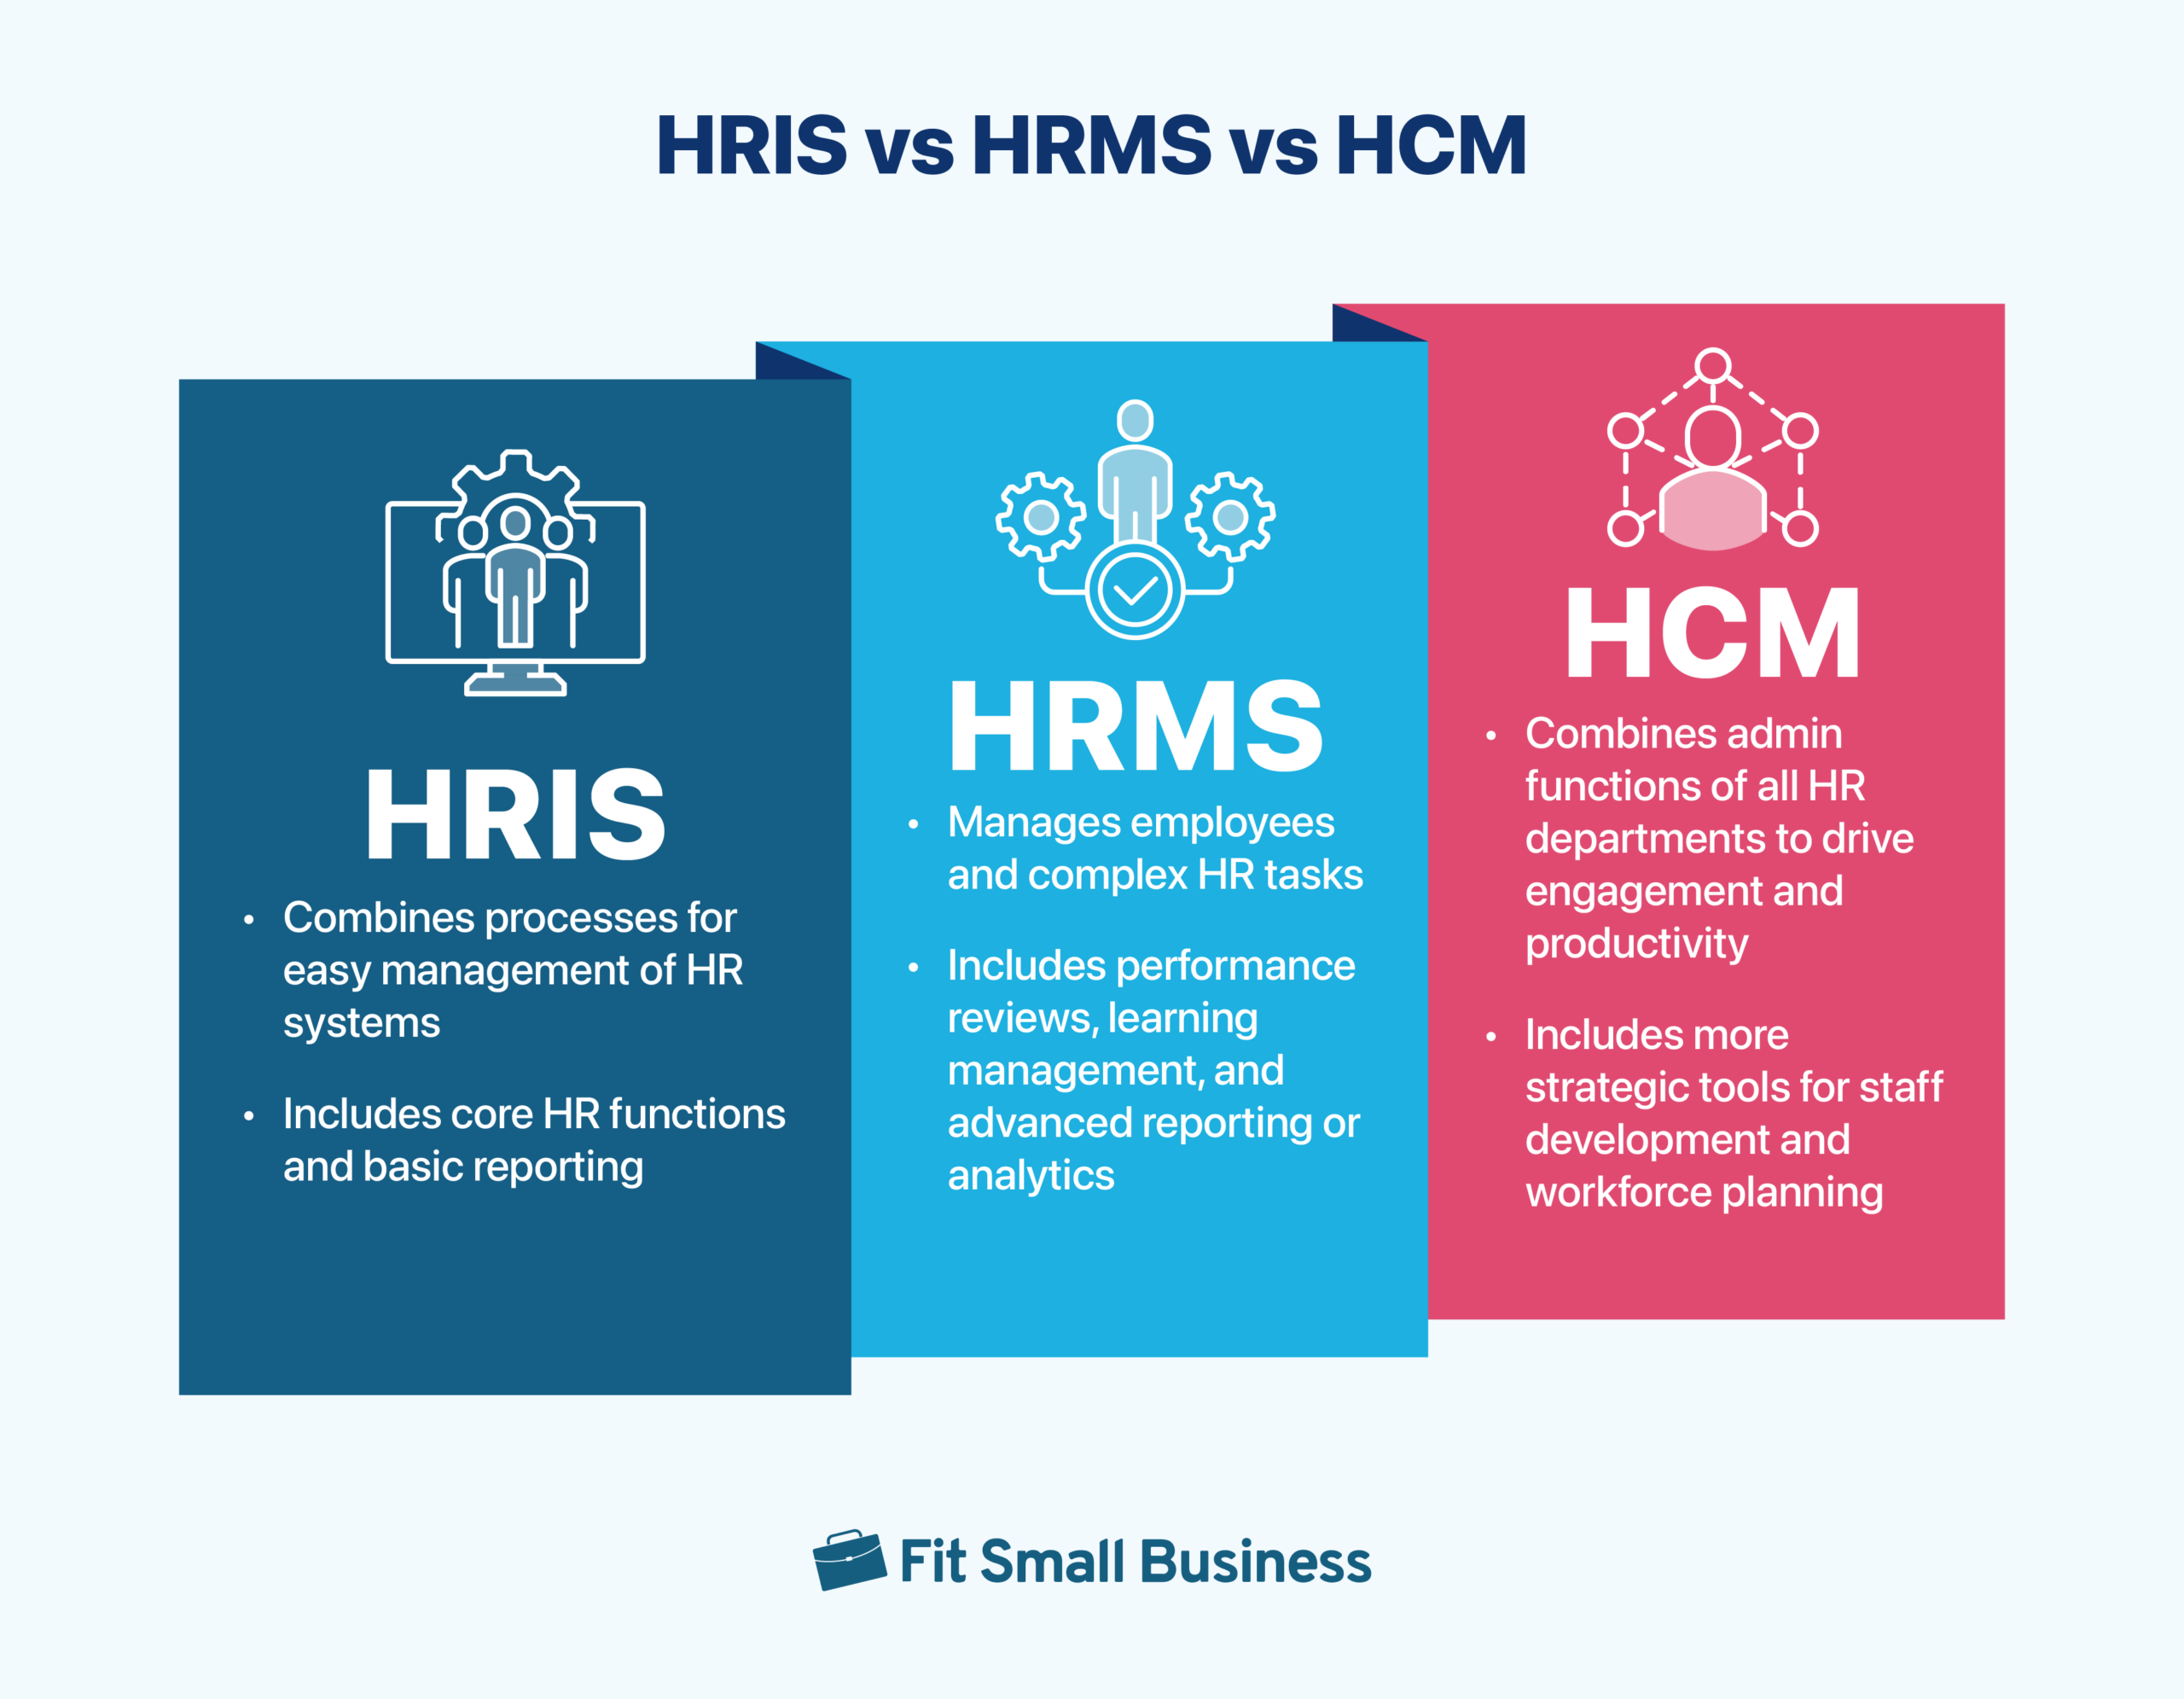 tiered colored blocks highlighting the differences between HRIS, HRMS, and HCM.